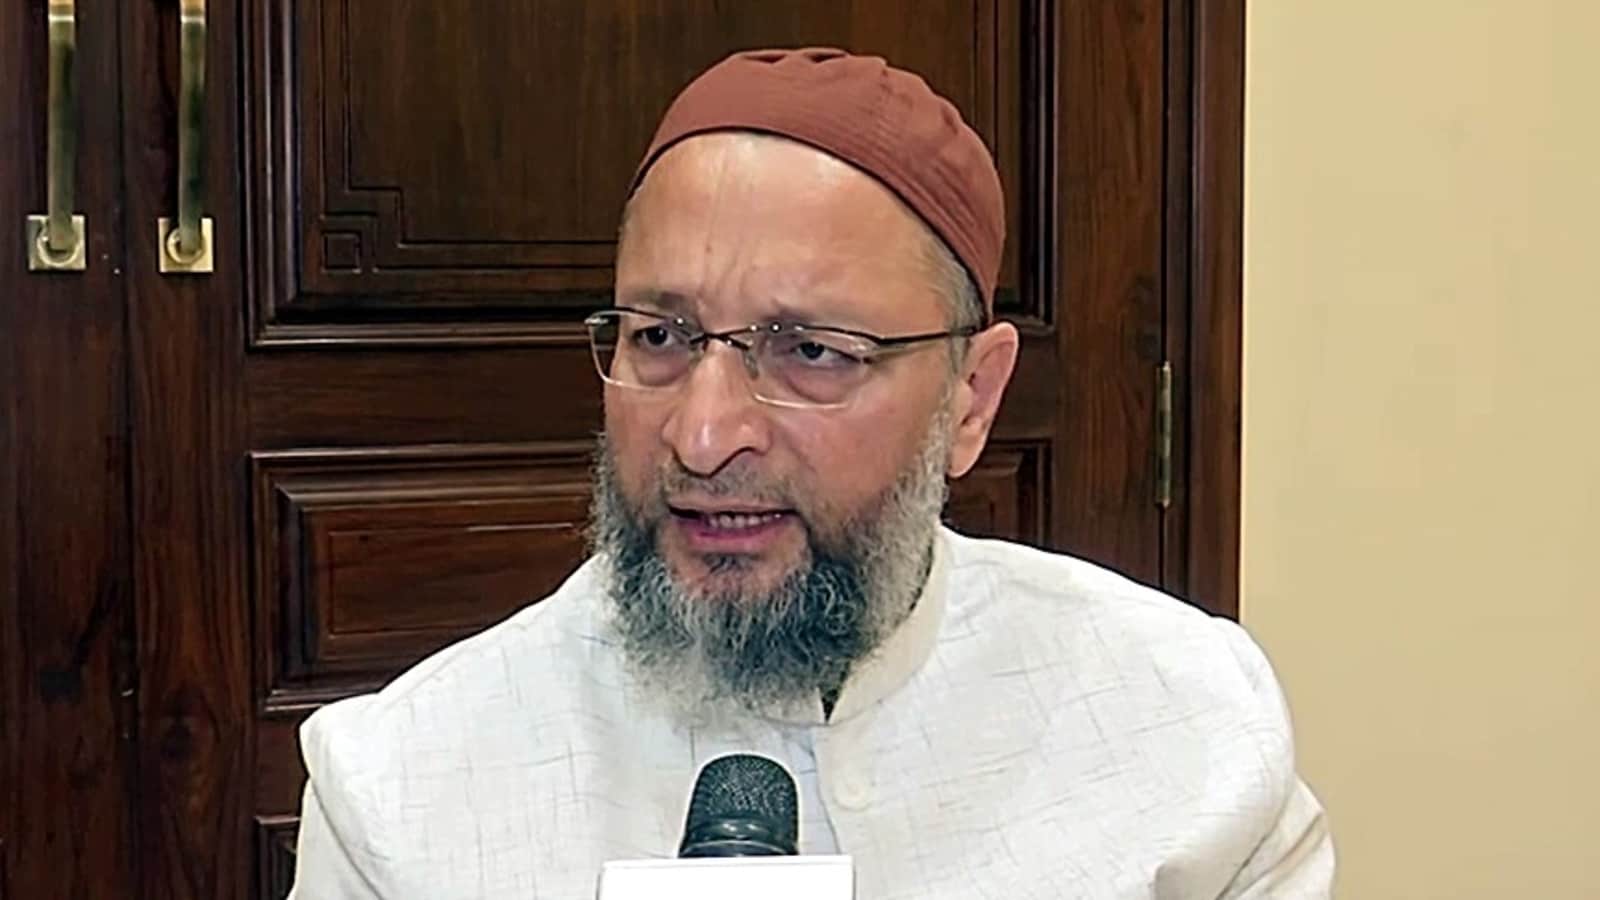 pm-modi-had-vowed-to-make-the-indian-rupee-at-par-with-the-us-dollar-barrister-owaisi